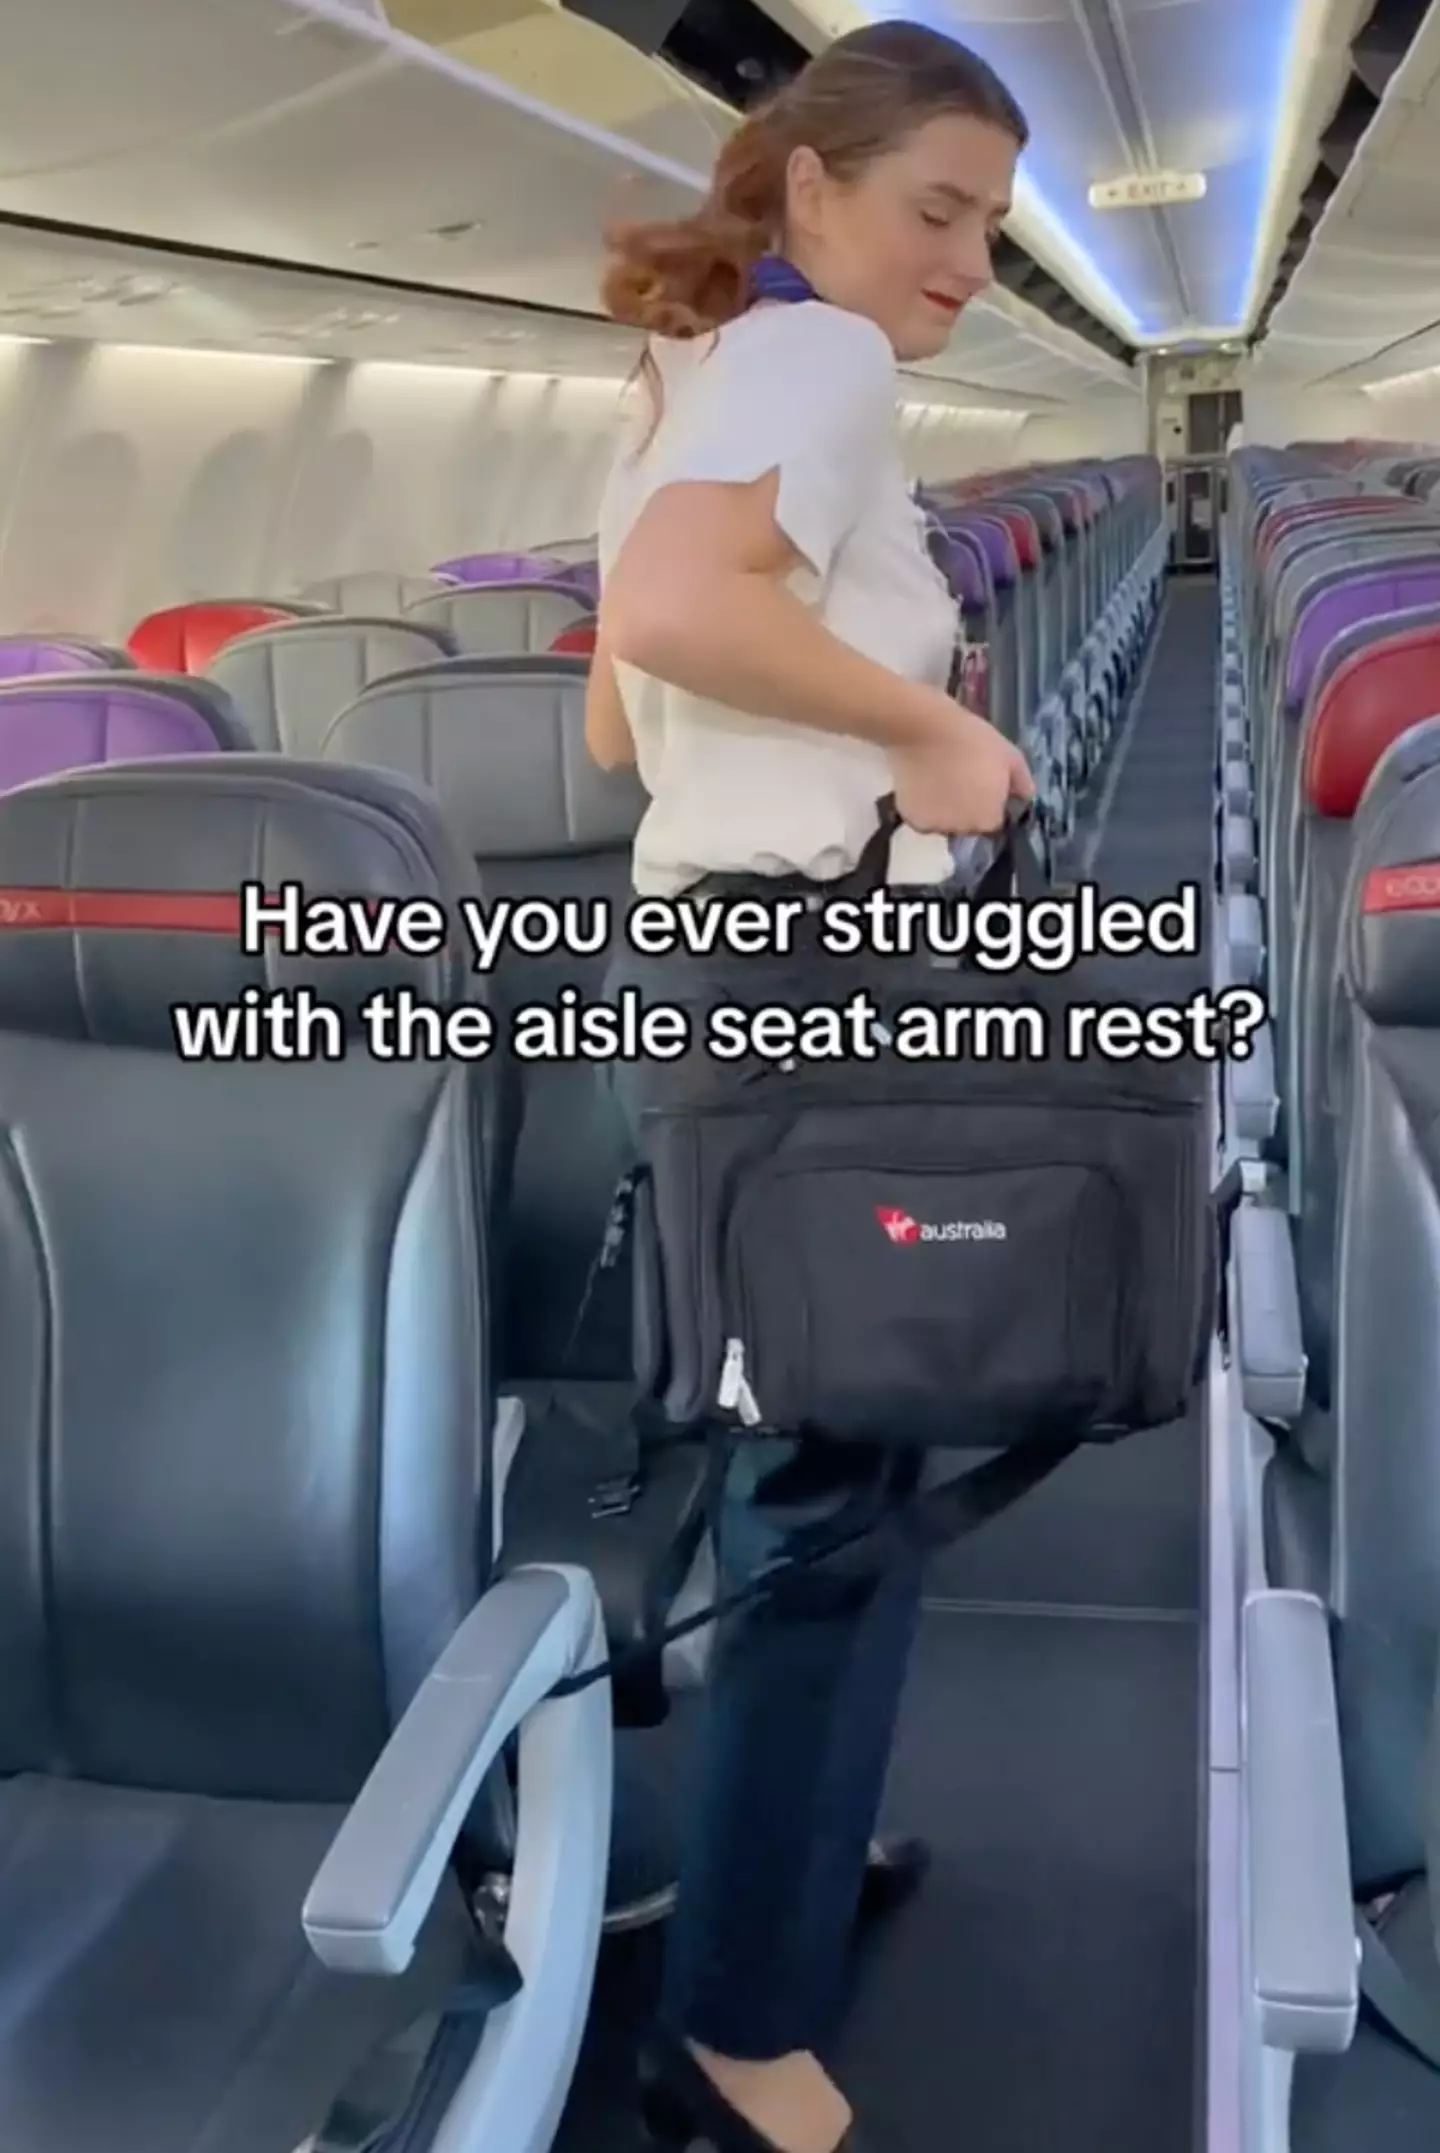 The flight attendant demonstrated some of the issues that come with economy seating.